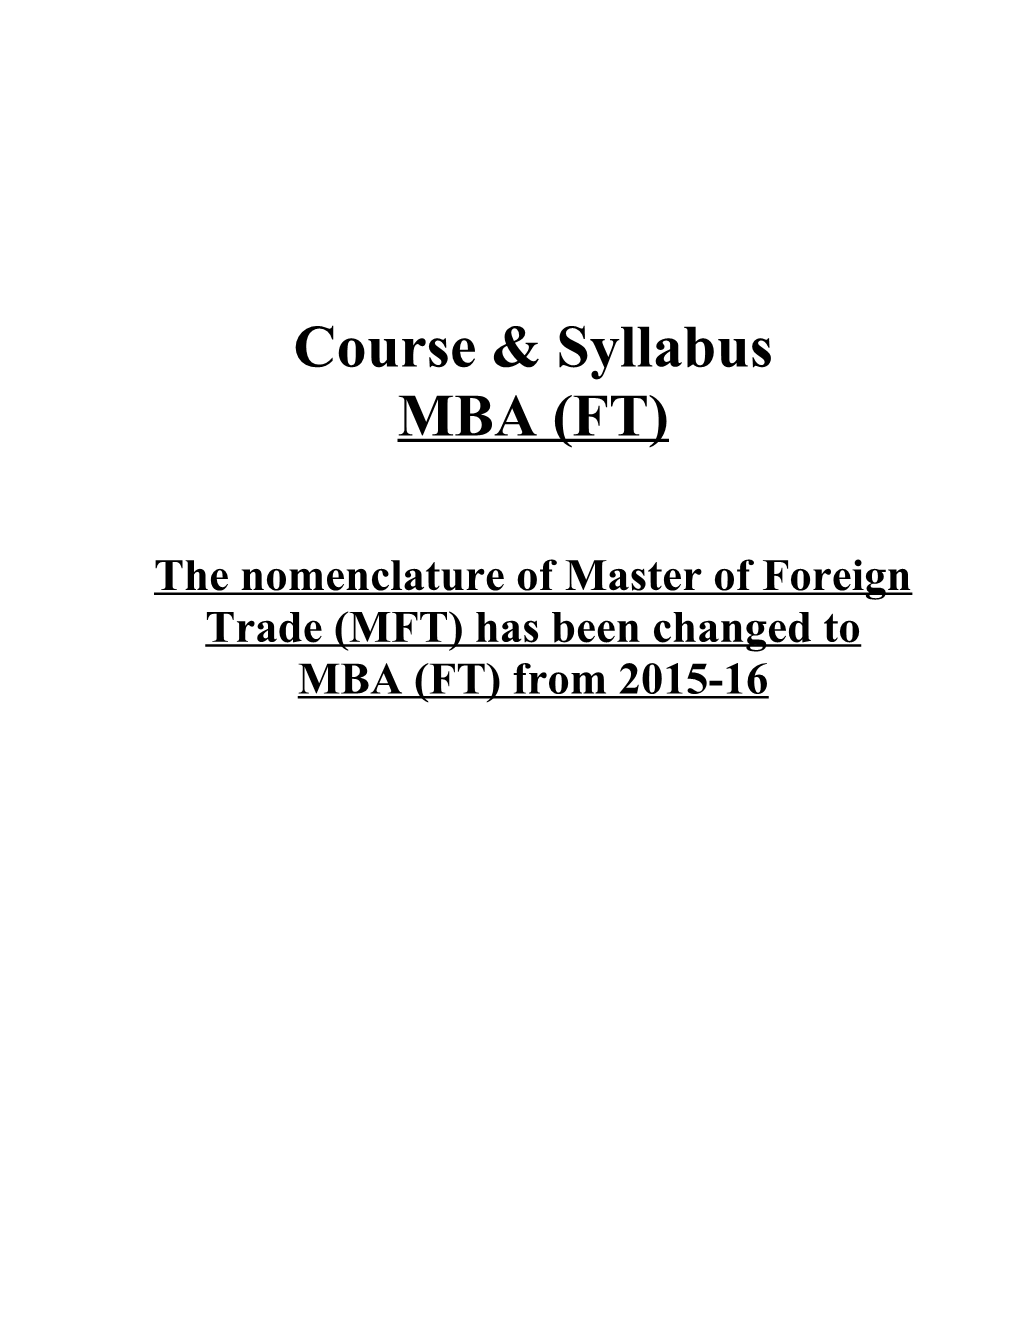 The Nomenclature of Master of Foreign Trade (MFT) Has Been Changed to MBA (FT) from 2015-16